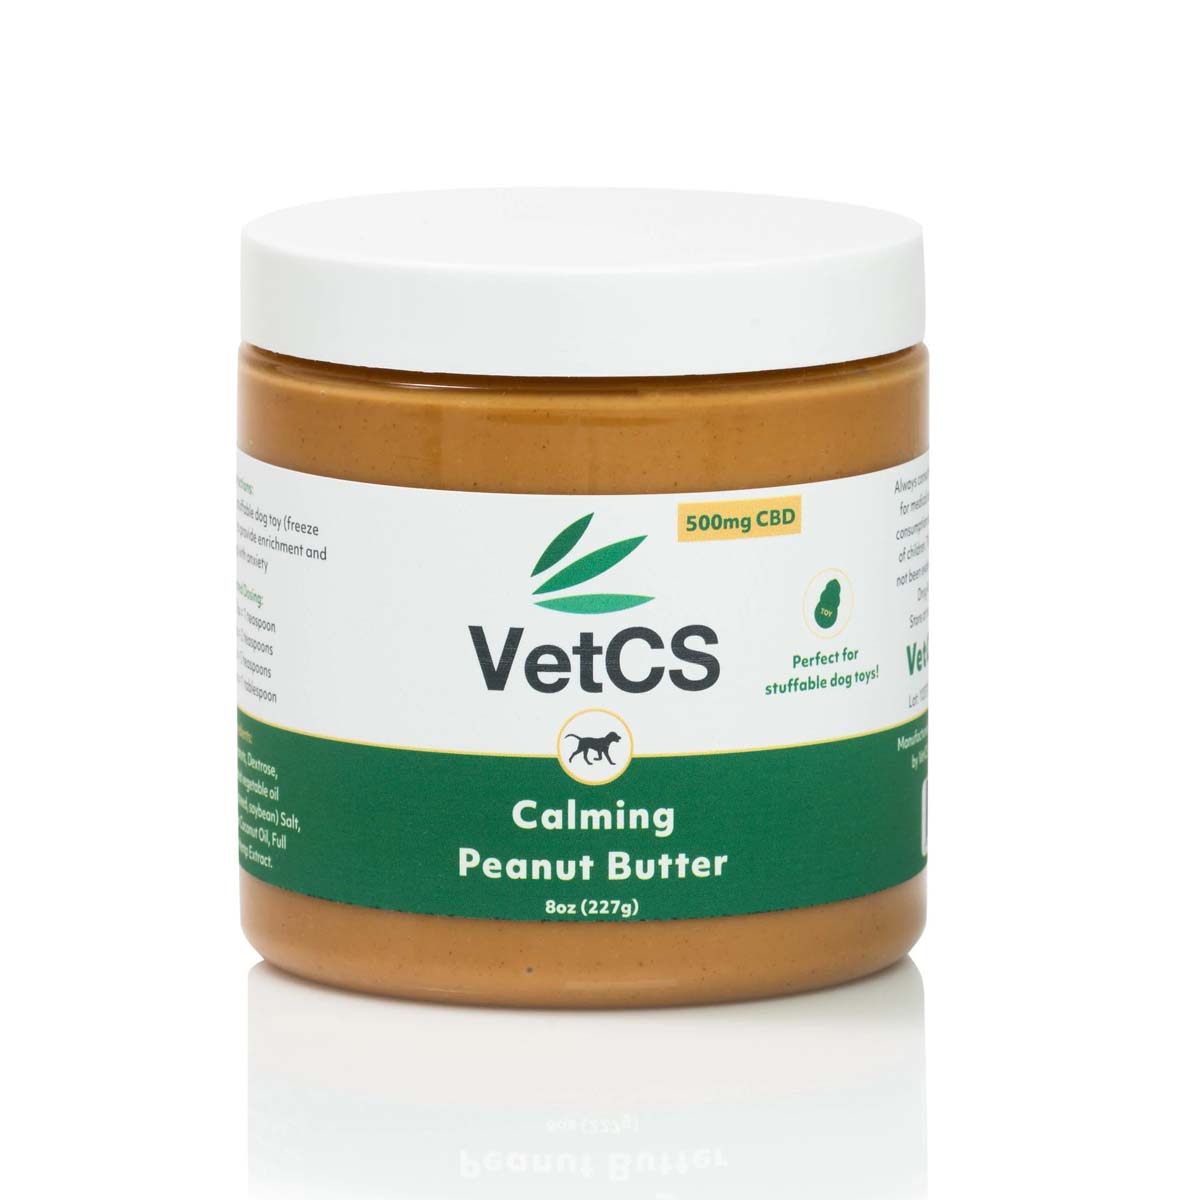 Plastic jar of VetCS CBD Calming Peanut Butter with green and white label